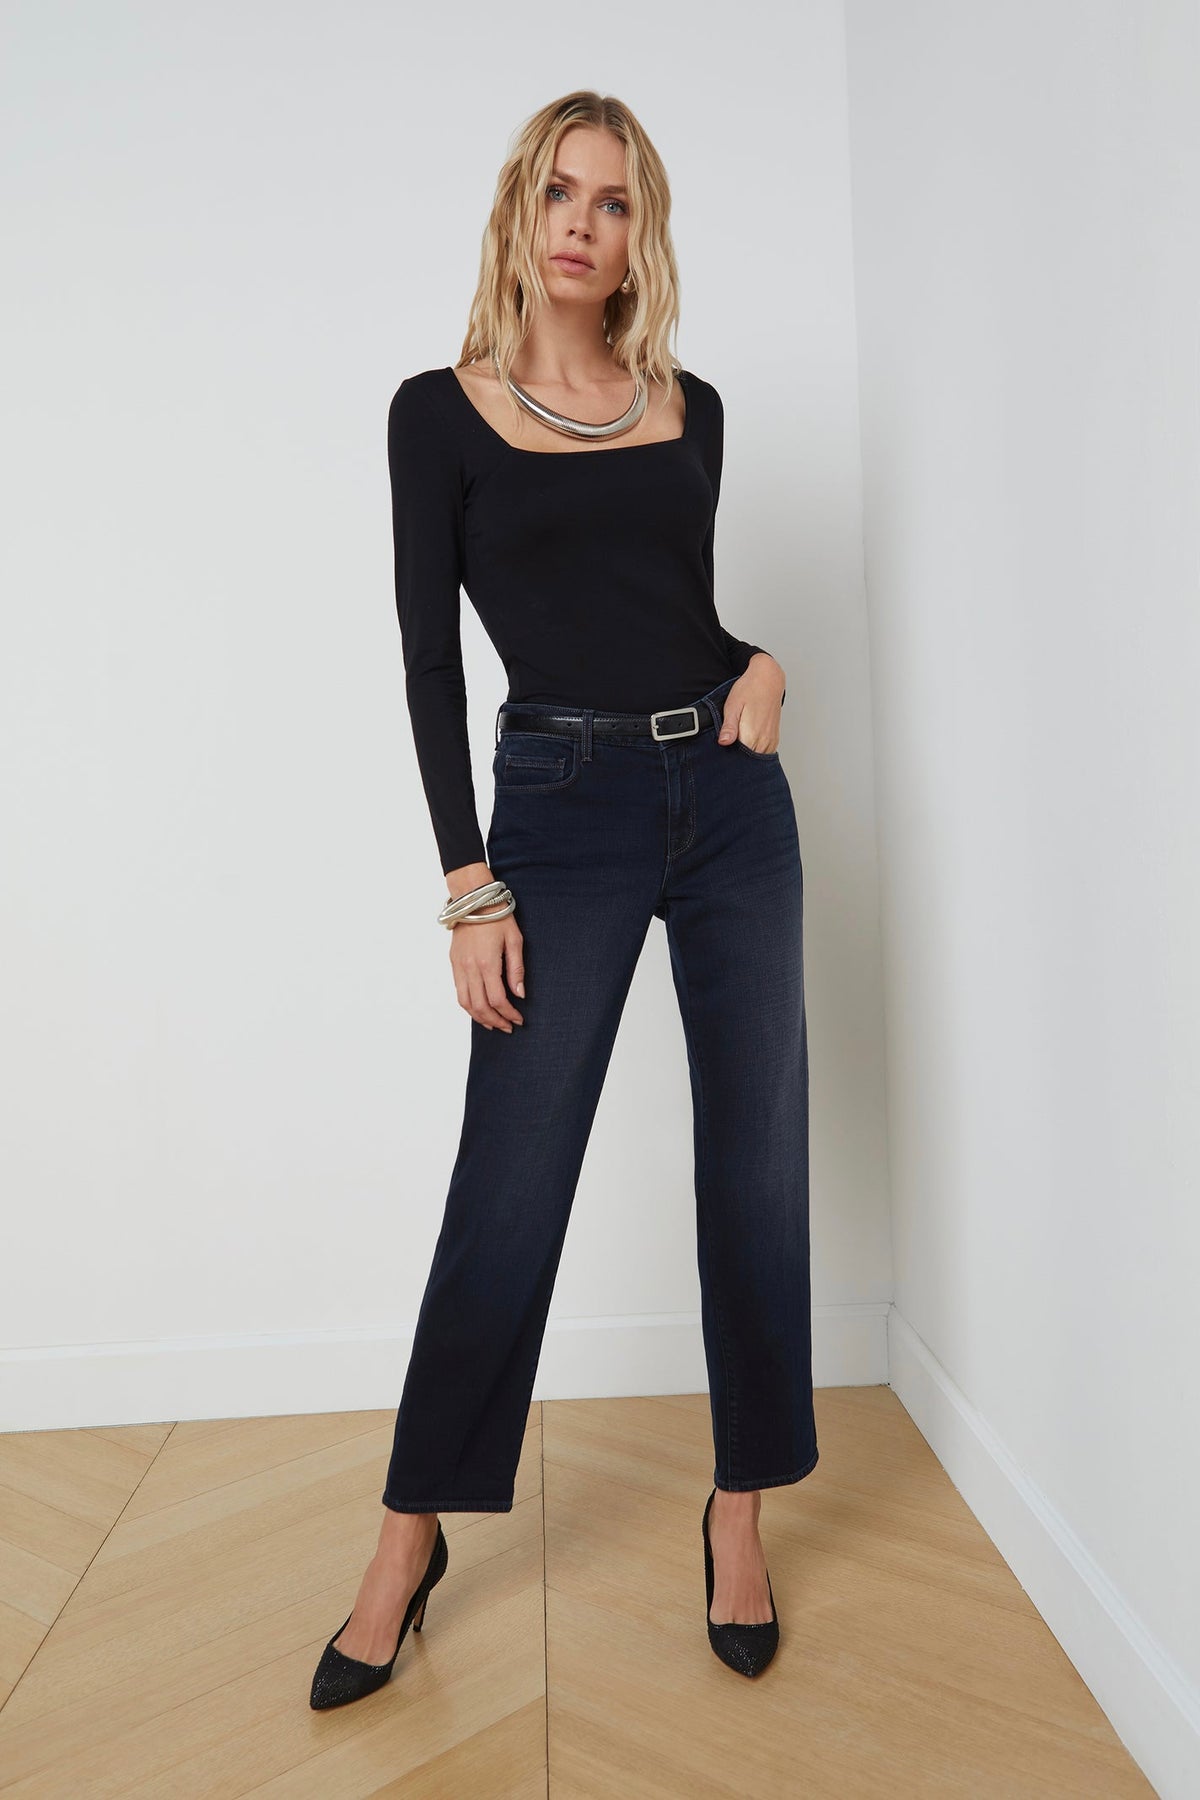 L'Agence Kinley Square Neck Top